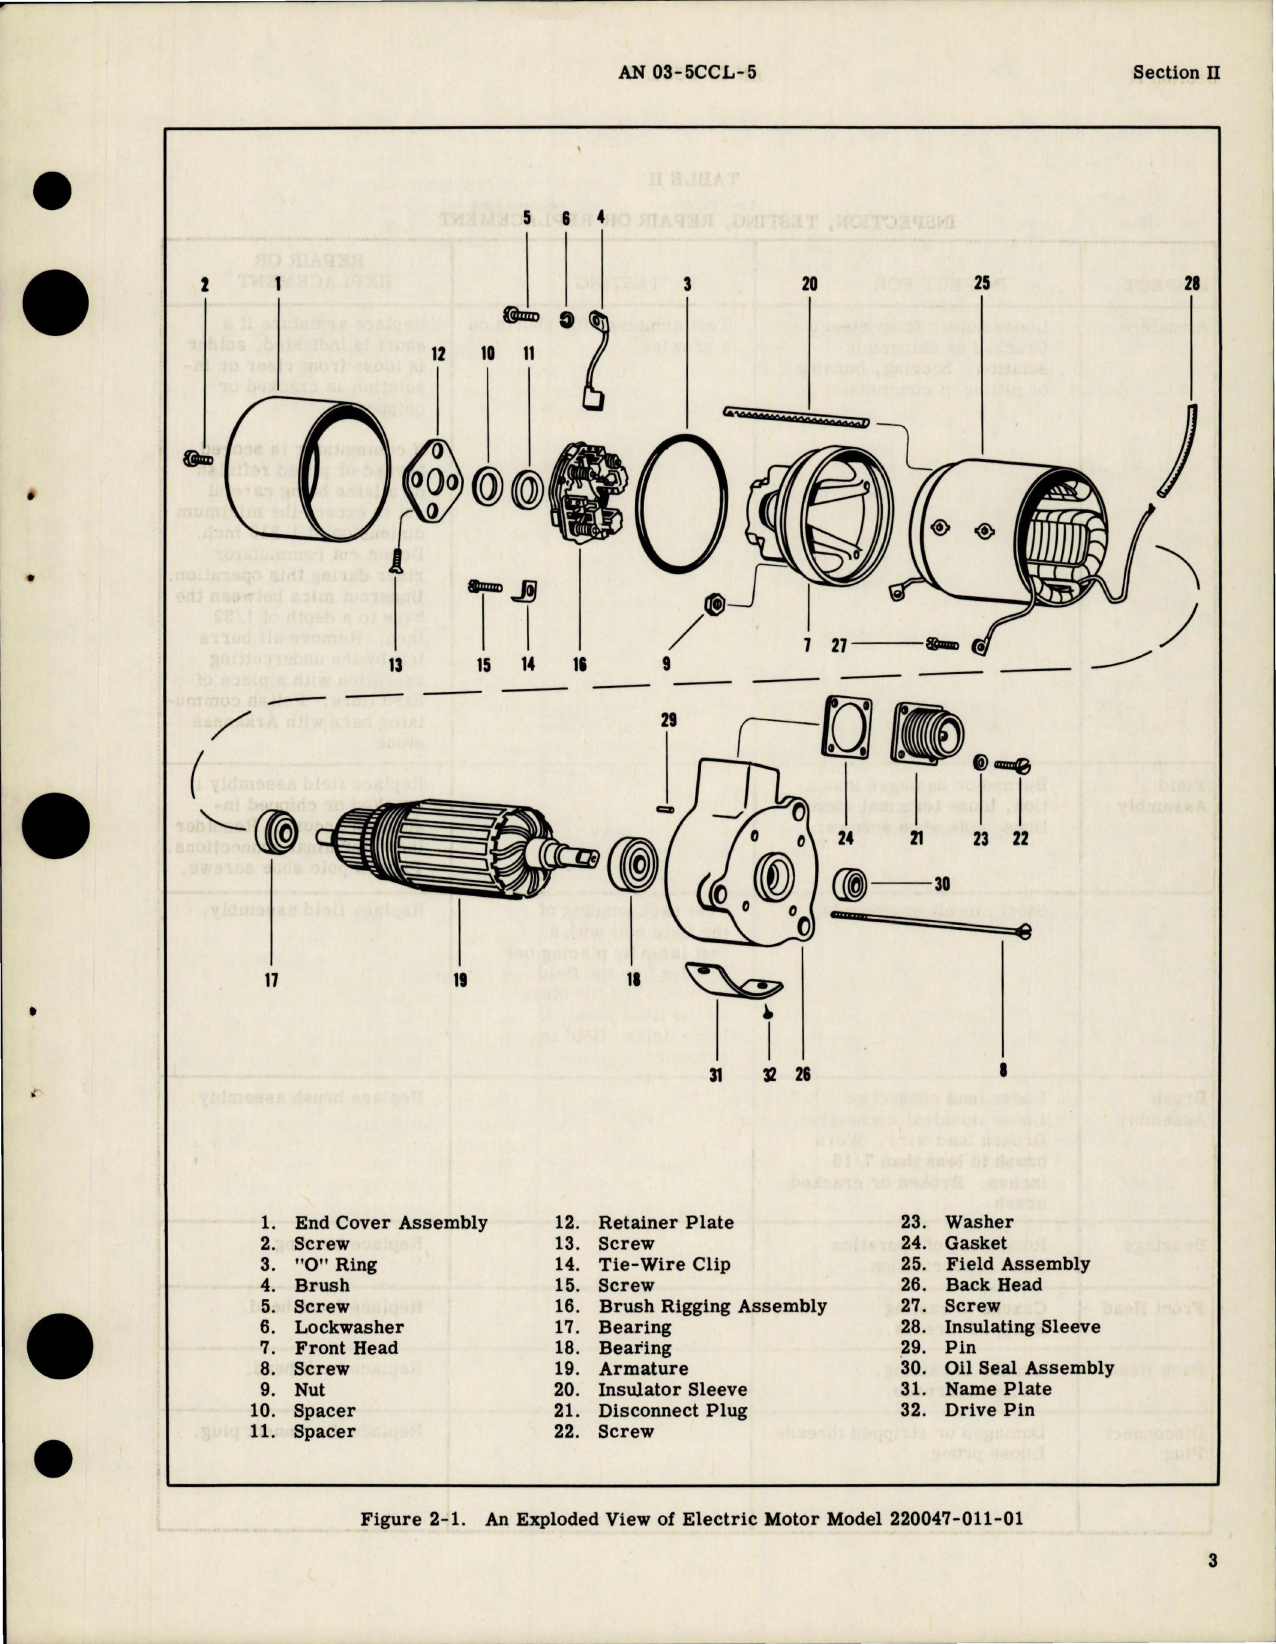 Sample page 7 from AirCorps Library document: Overhaul Instructions for Electric Motor - Model 220047-011 and 220047-070 Series